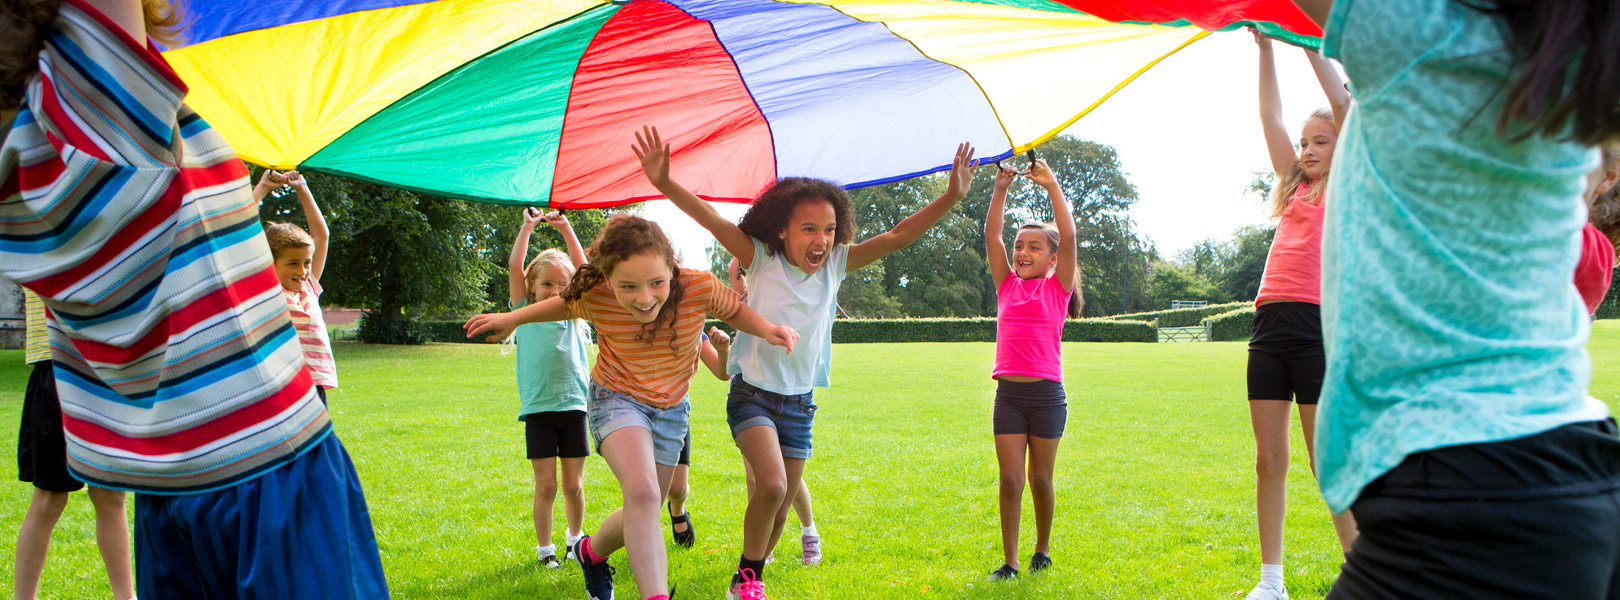 Kids playing with parachute